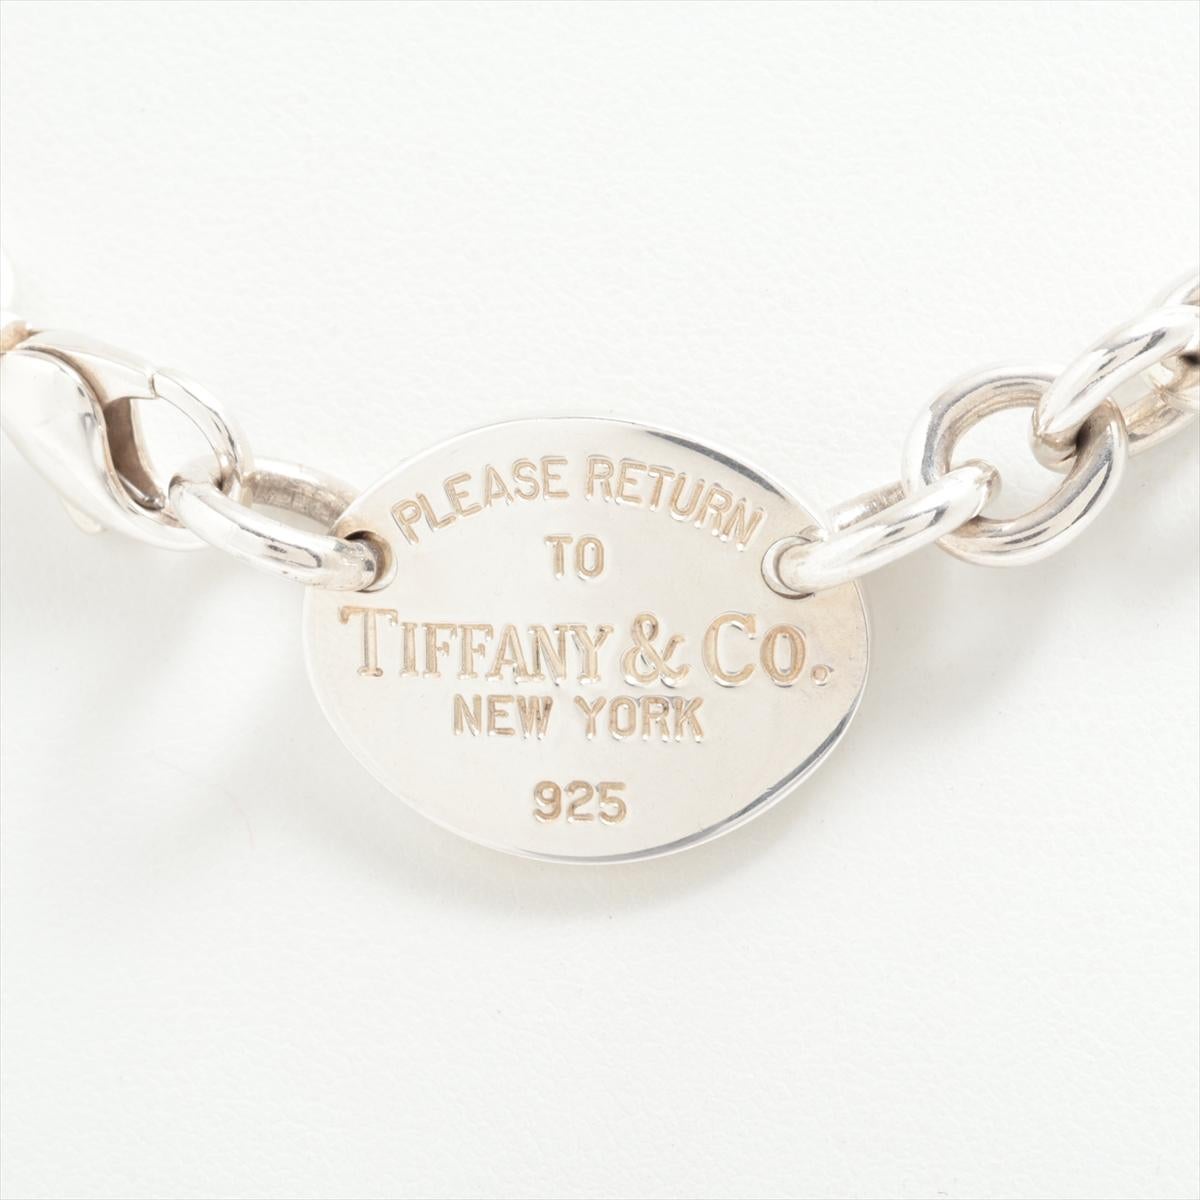 The Tiffany & Co. Return To Tiffany Oval Tag Necklace in Silver is an iconic and timeless piece of jewelry that epitomizes elegance and sophistication. Crafted from high-quality sterling silver, the necklace features a classic oval-shaped pendant